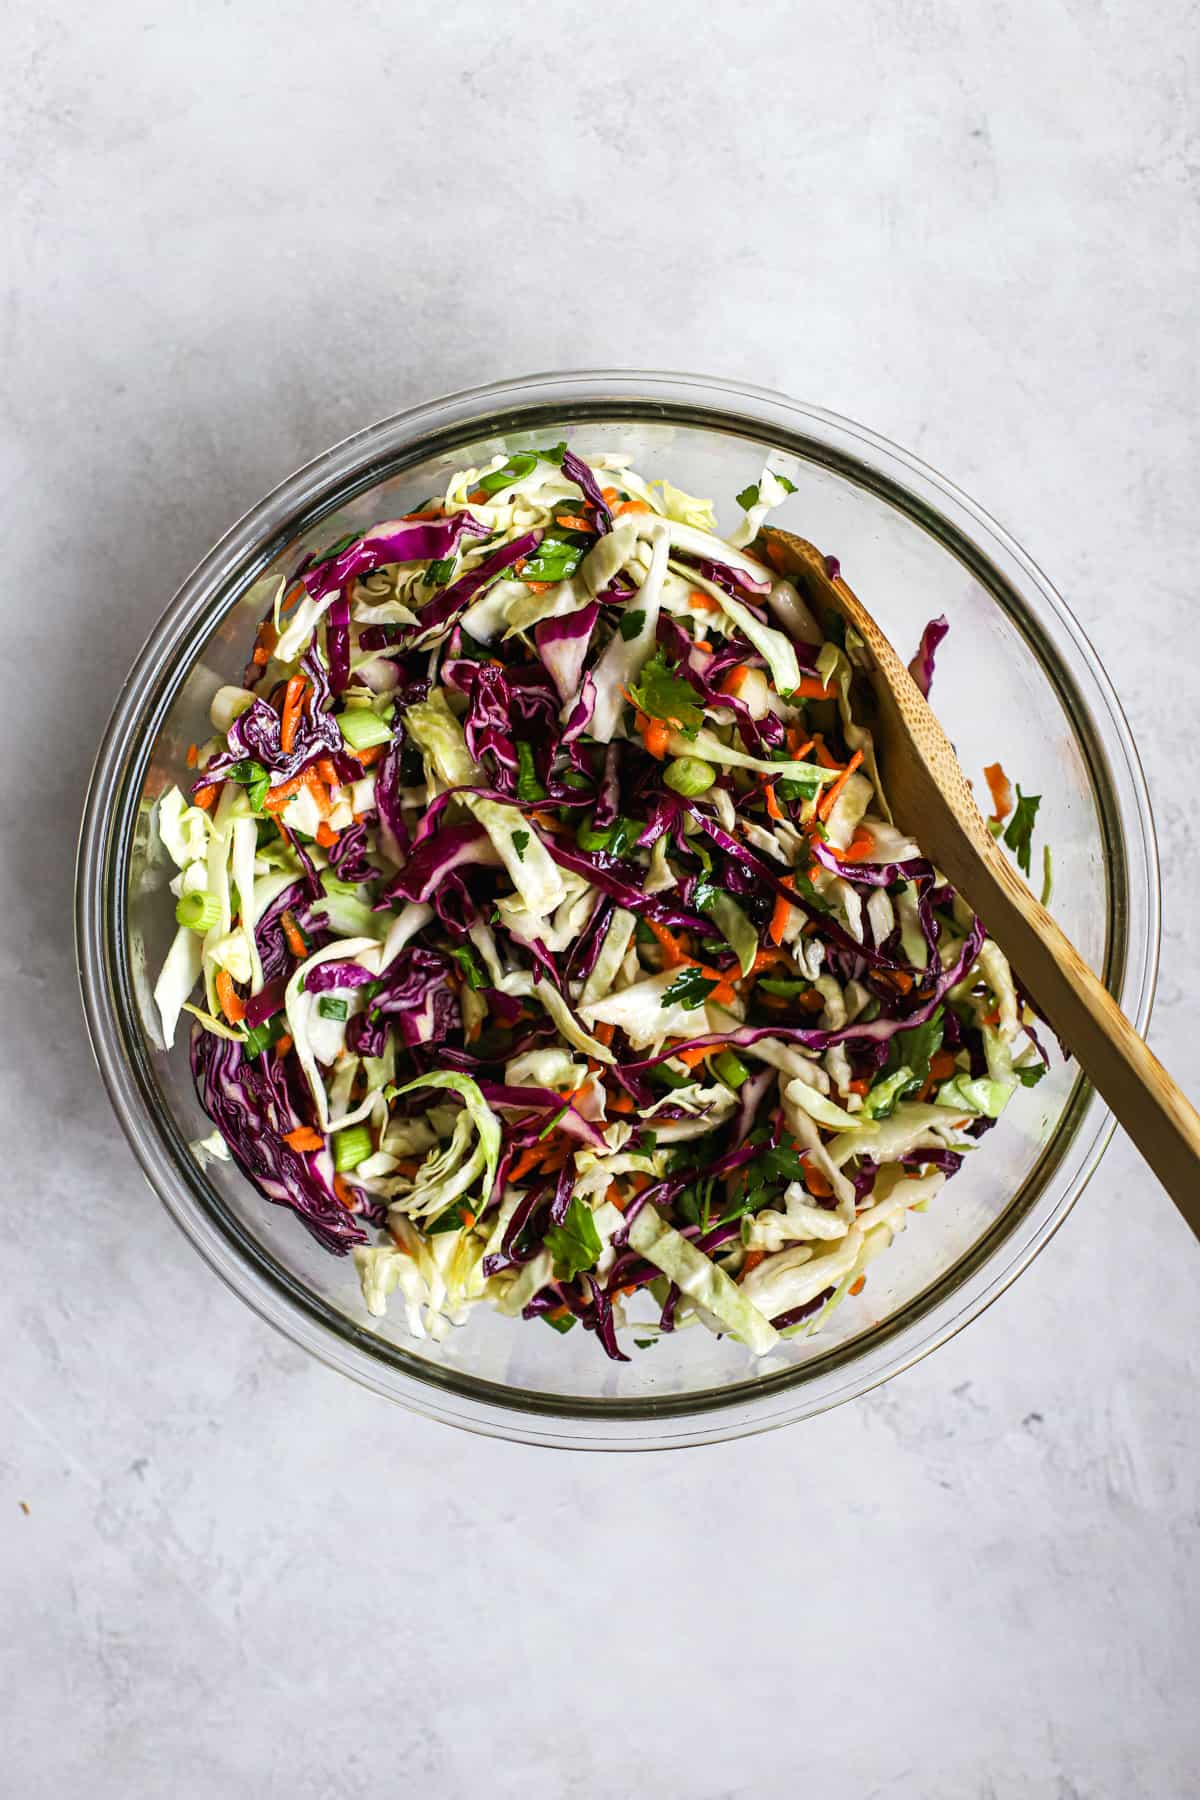 Green and red cabbage, carrots, green onions, and parsley tossed together in healthy coleslaw vinaigrette, in clear glass bowl with wooden spoon